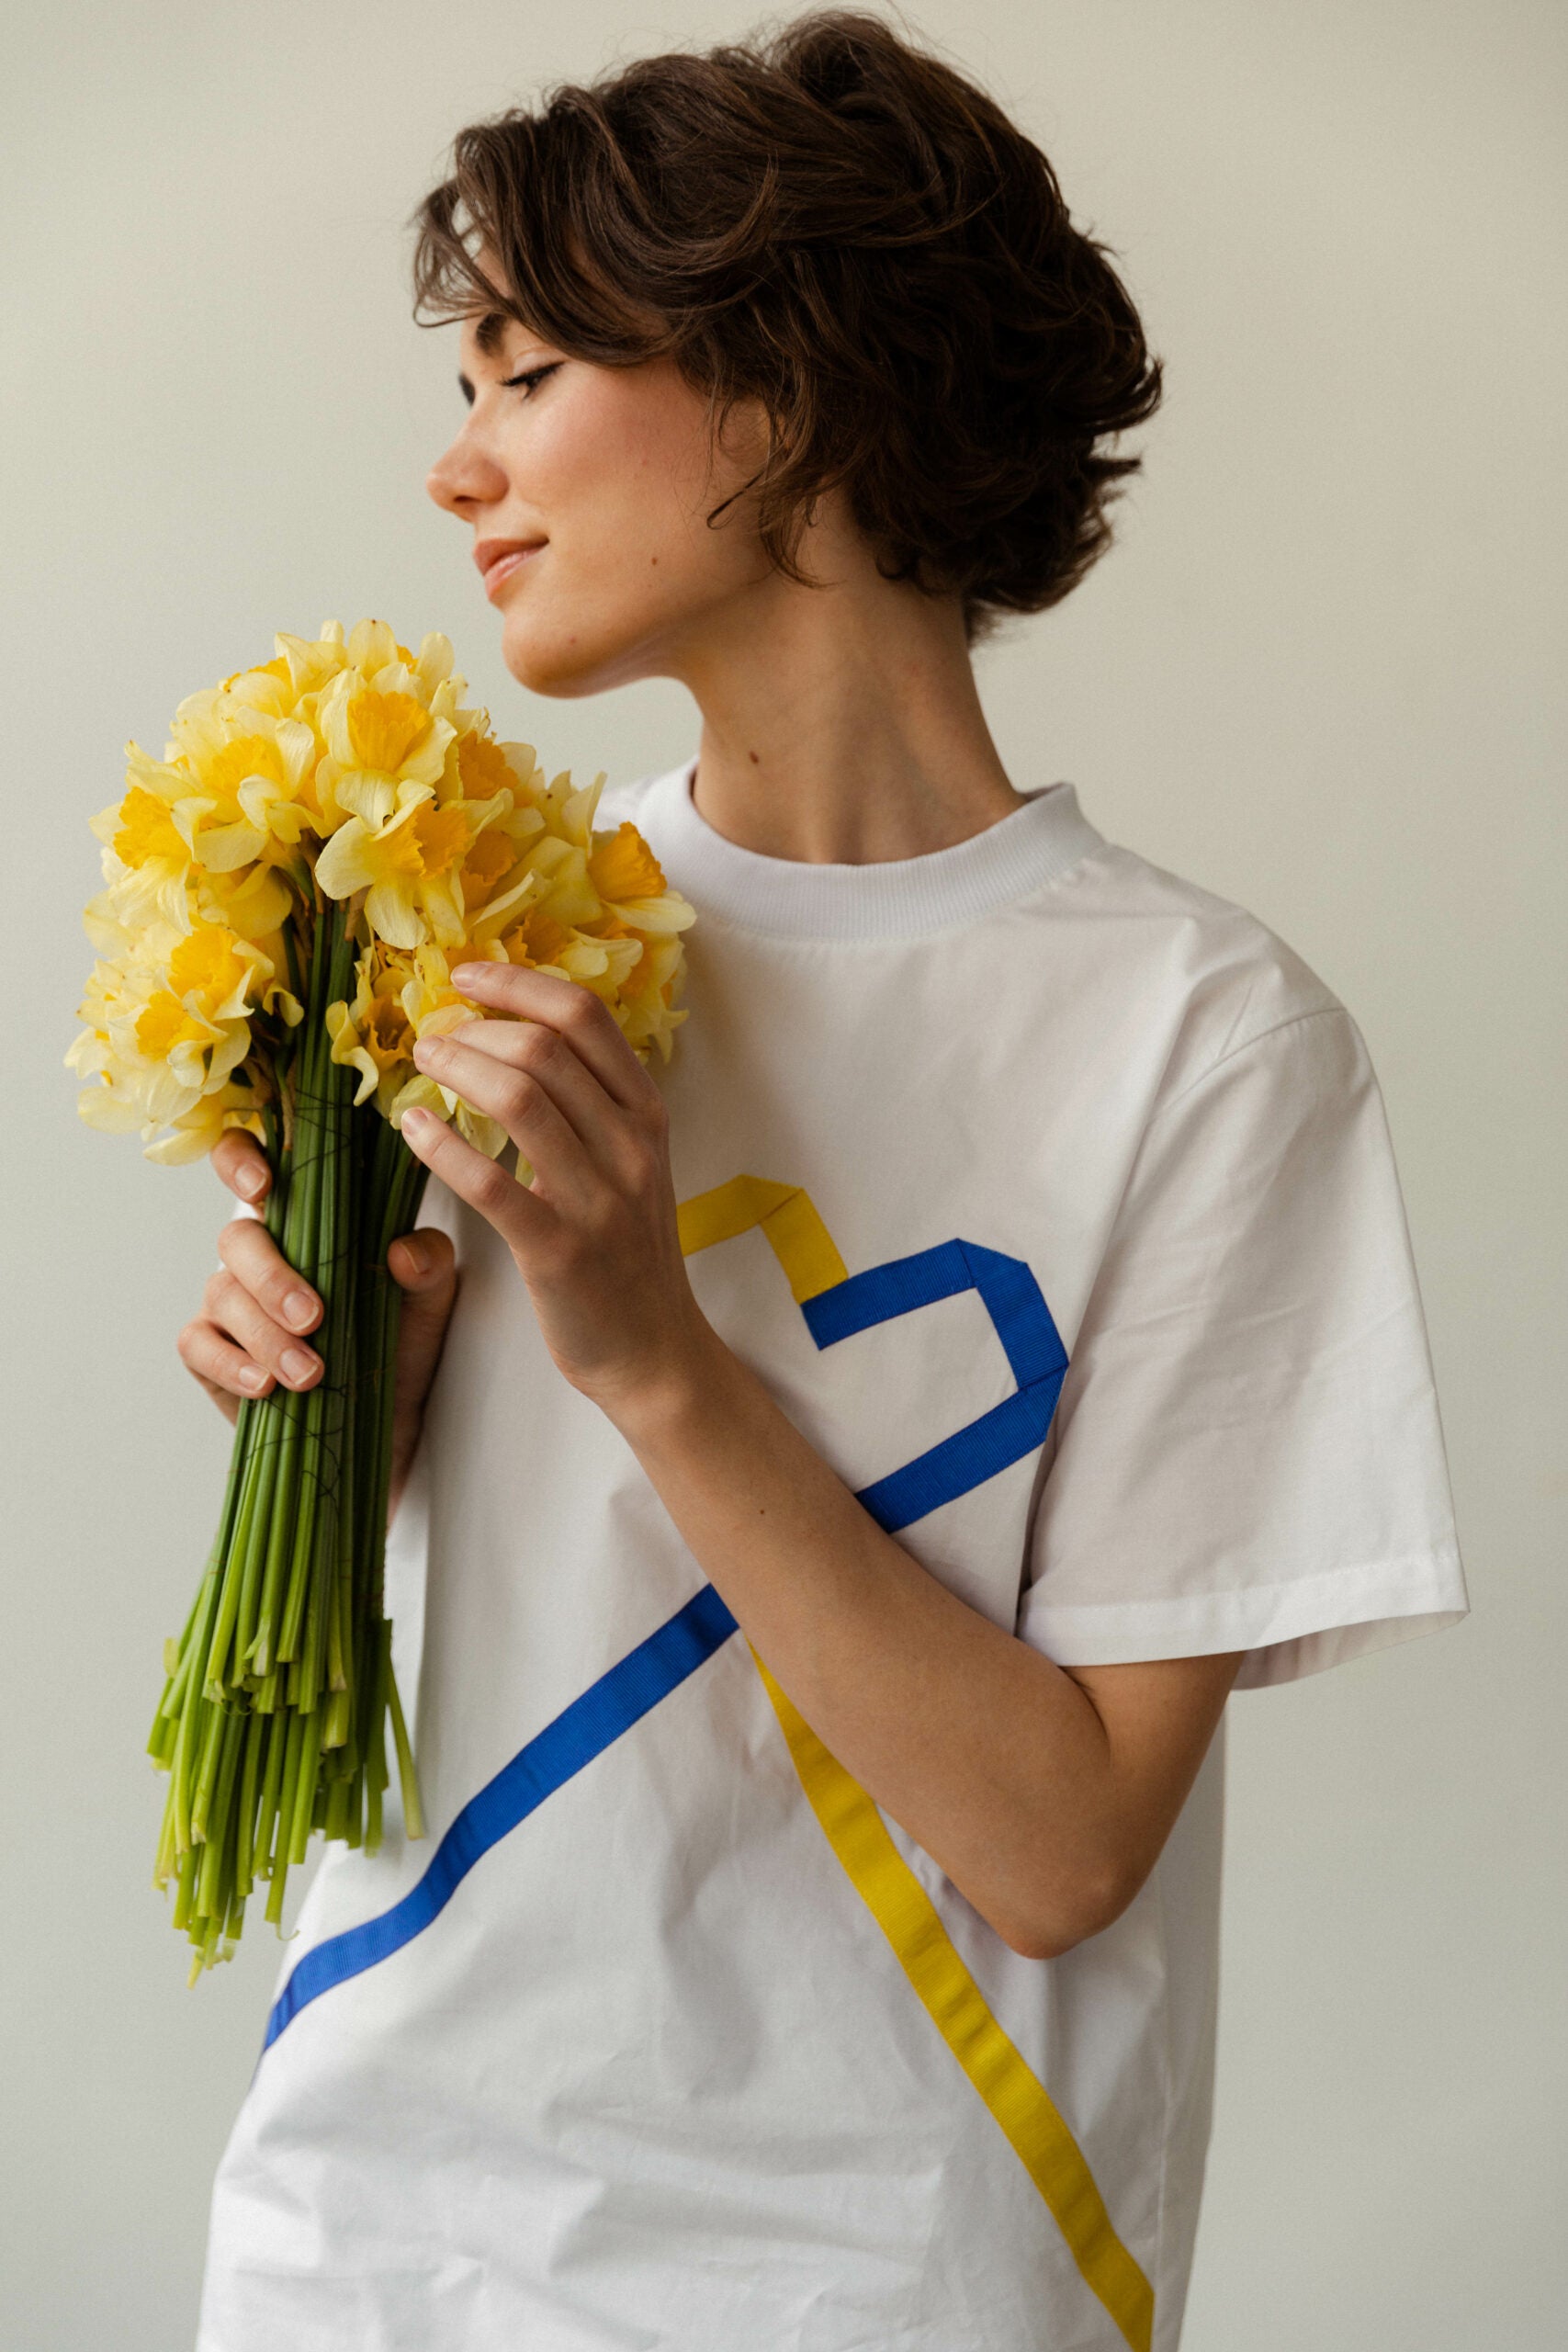 T-shirt heart with yellow and blue ribbons